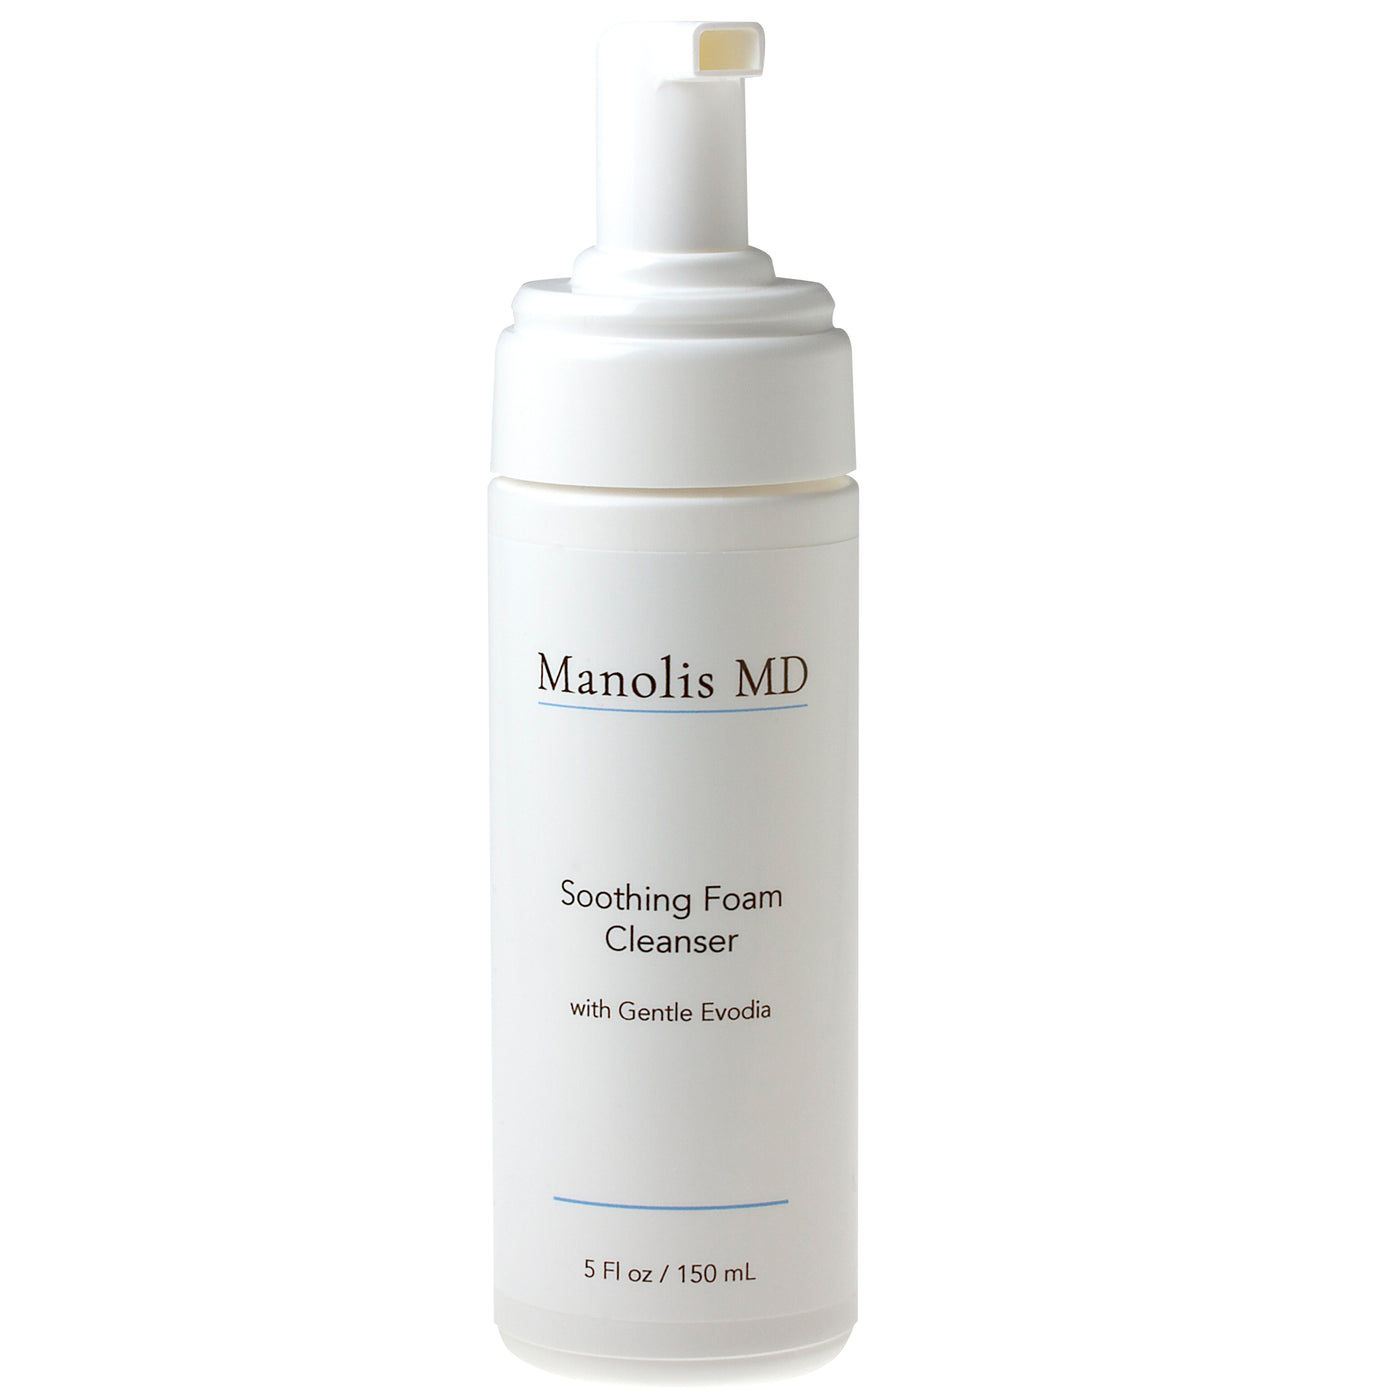 The Soothing Foam Cleanser is an extra-gentle cleanser formulated for sensitive skin. This product is great for sensitive skin clients.